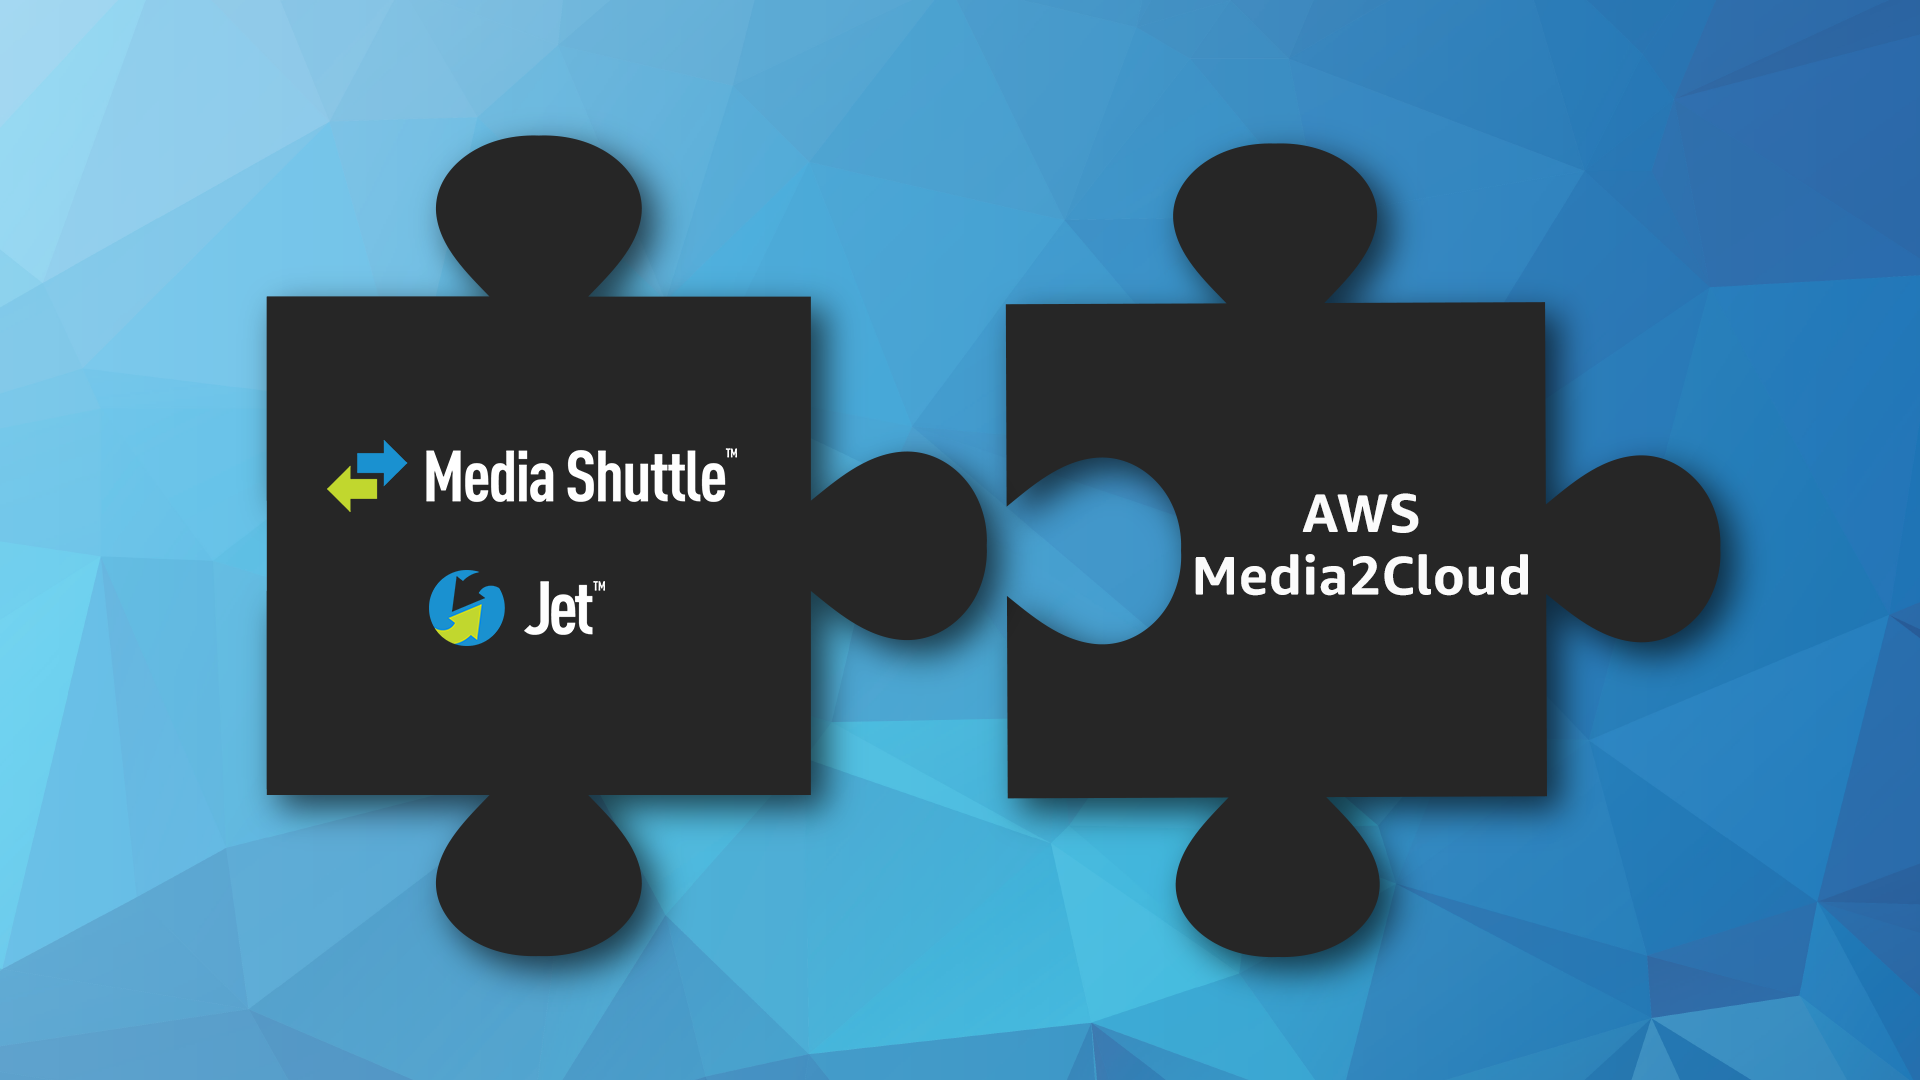 Puzzle piece with Media Shuttle and Jet connecting to another puzzle piece with AWS and Media2Cloud